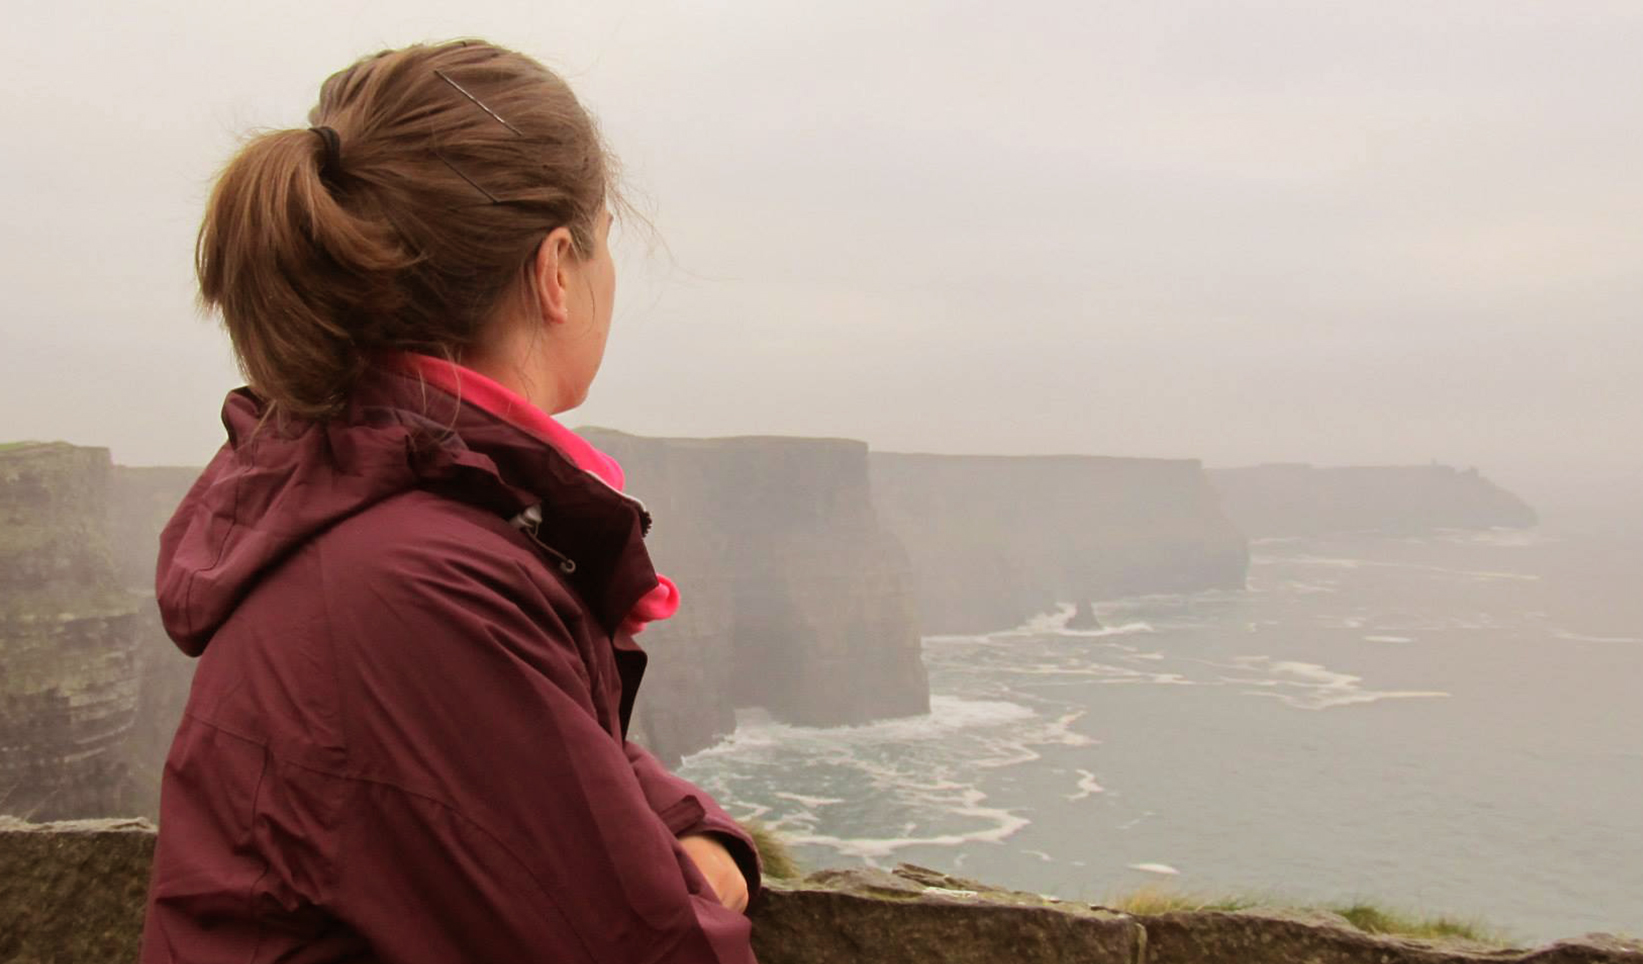 Travel Story: How traveling solo changed my life